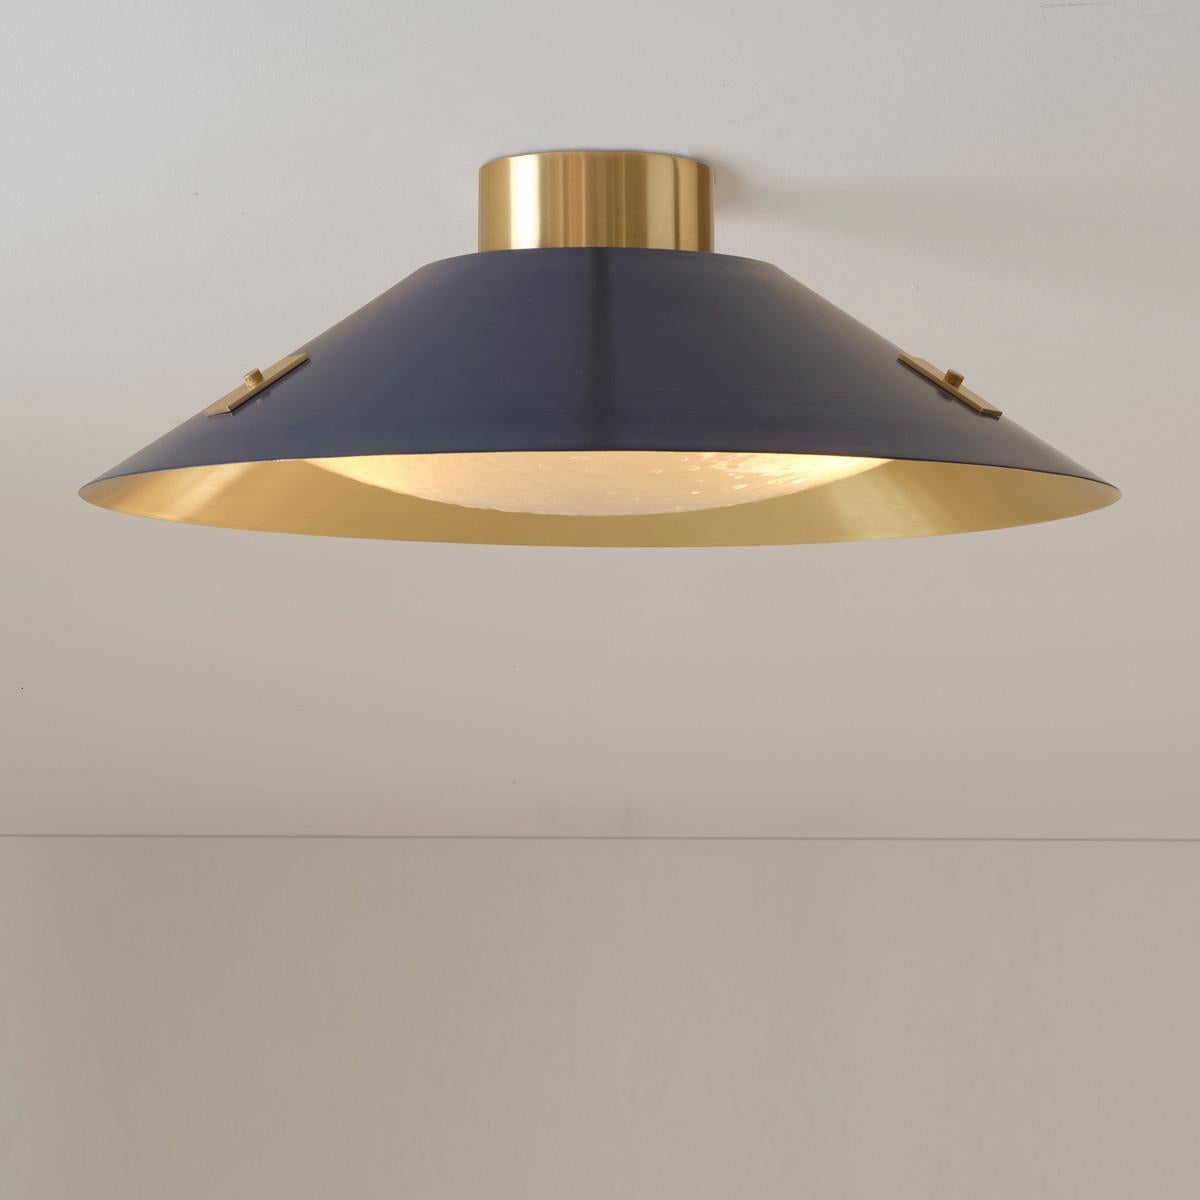 Kono Pendant by Gaspare Asaro. Satin Brass and Sand White For Sale 2